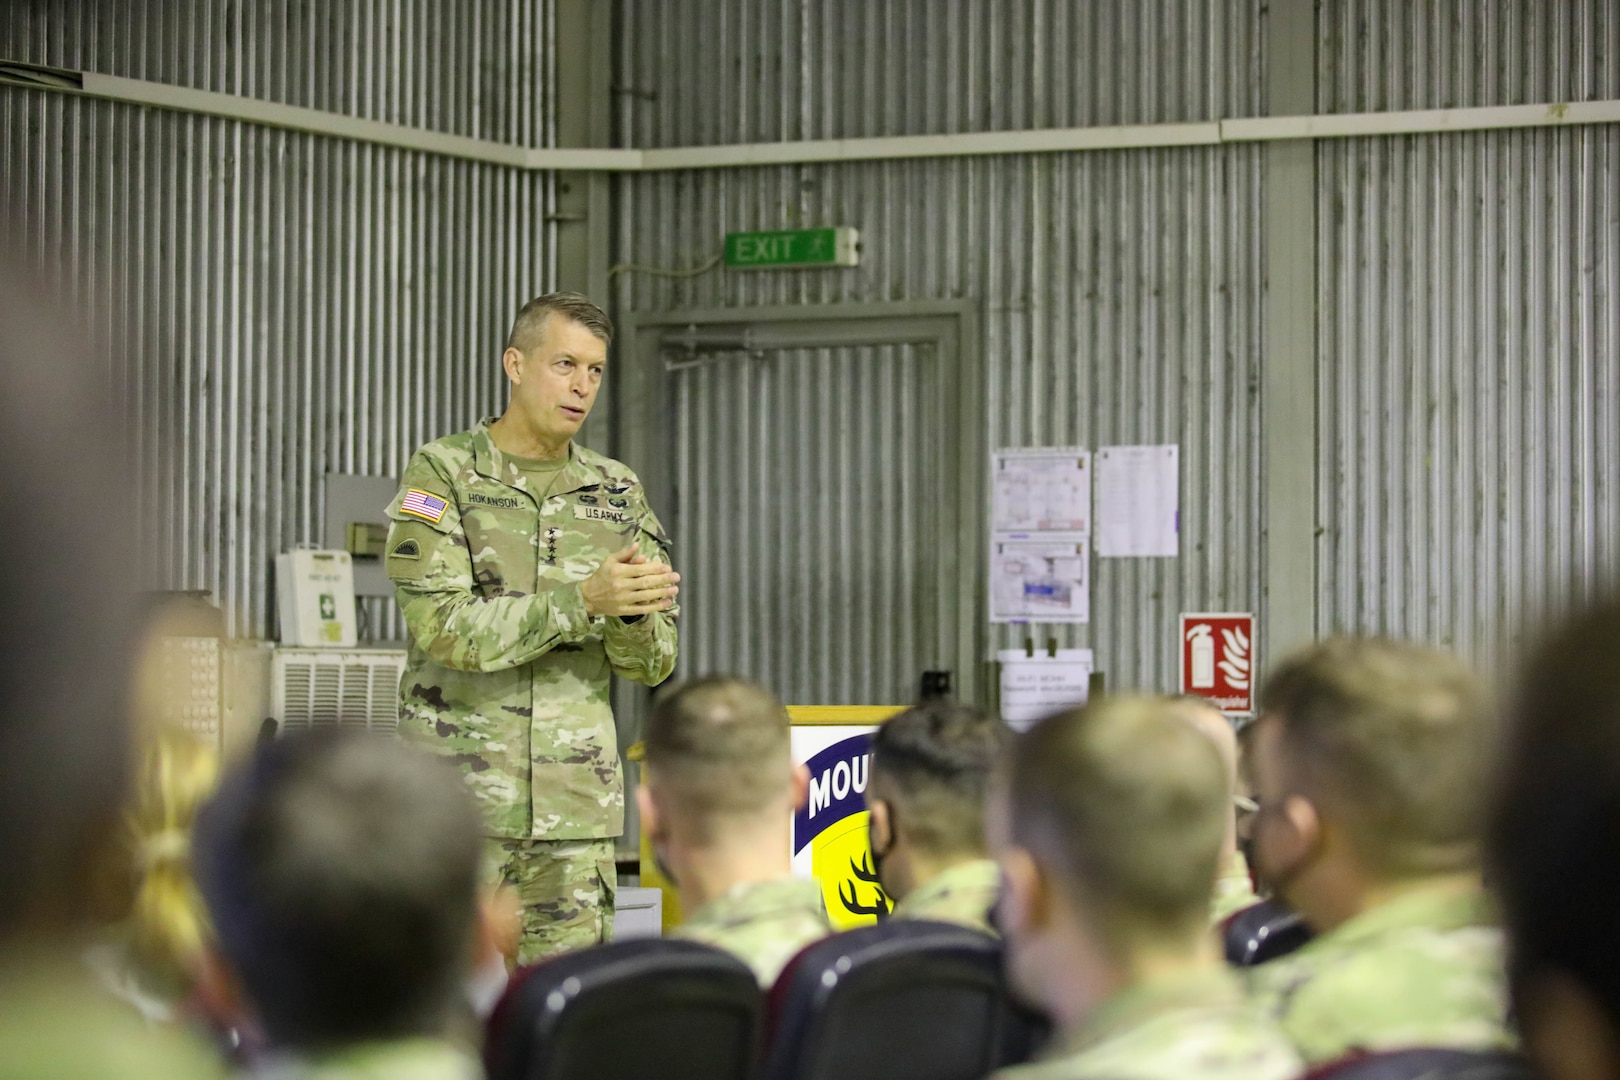 U.S. Army Gen. Daniel Hokanson, chief, National Guard Bureau, visits Soldiers deployed on Camp Bondsteel, Kosovo, supporting the KFOR mission Nov. 24, 2021.